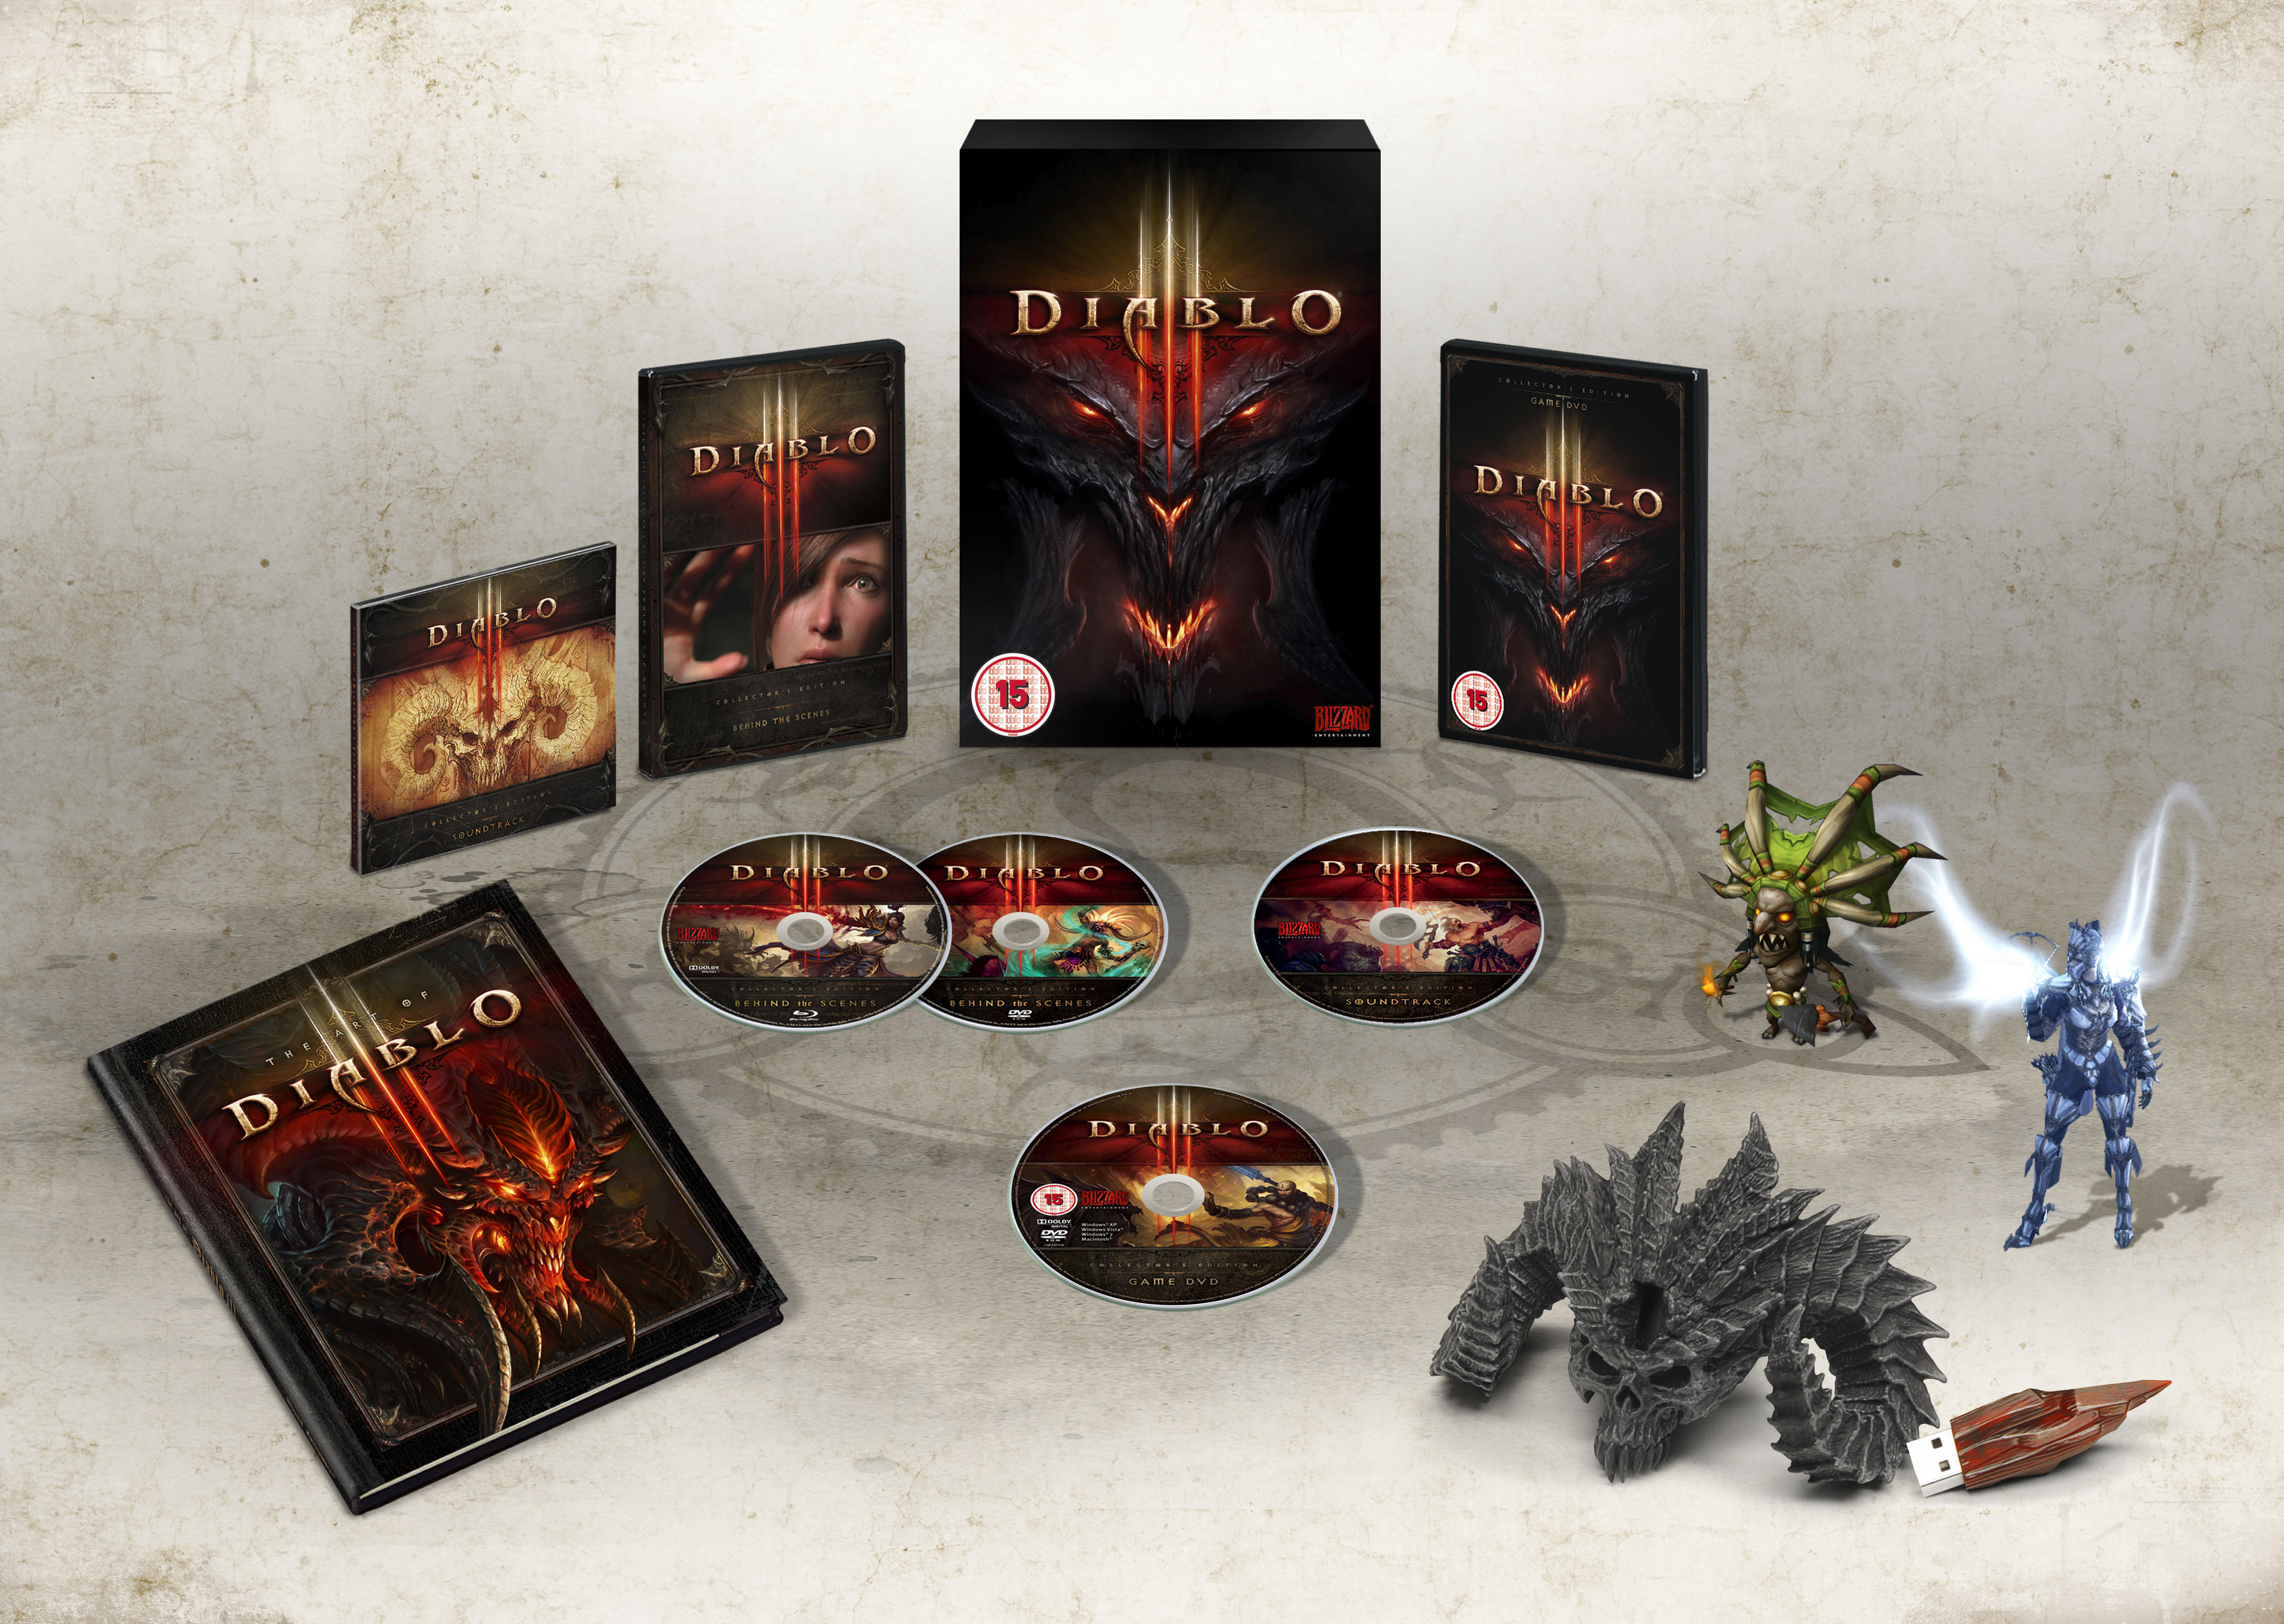 diablo 3 which edition to buy pc reddit